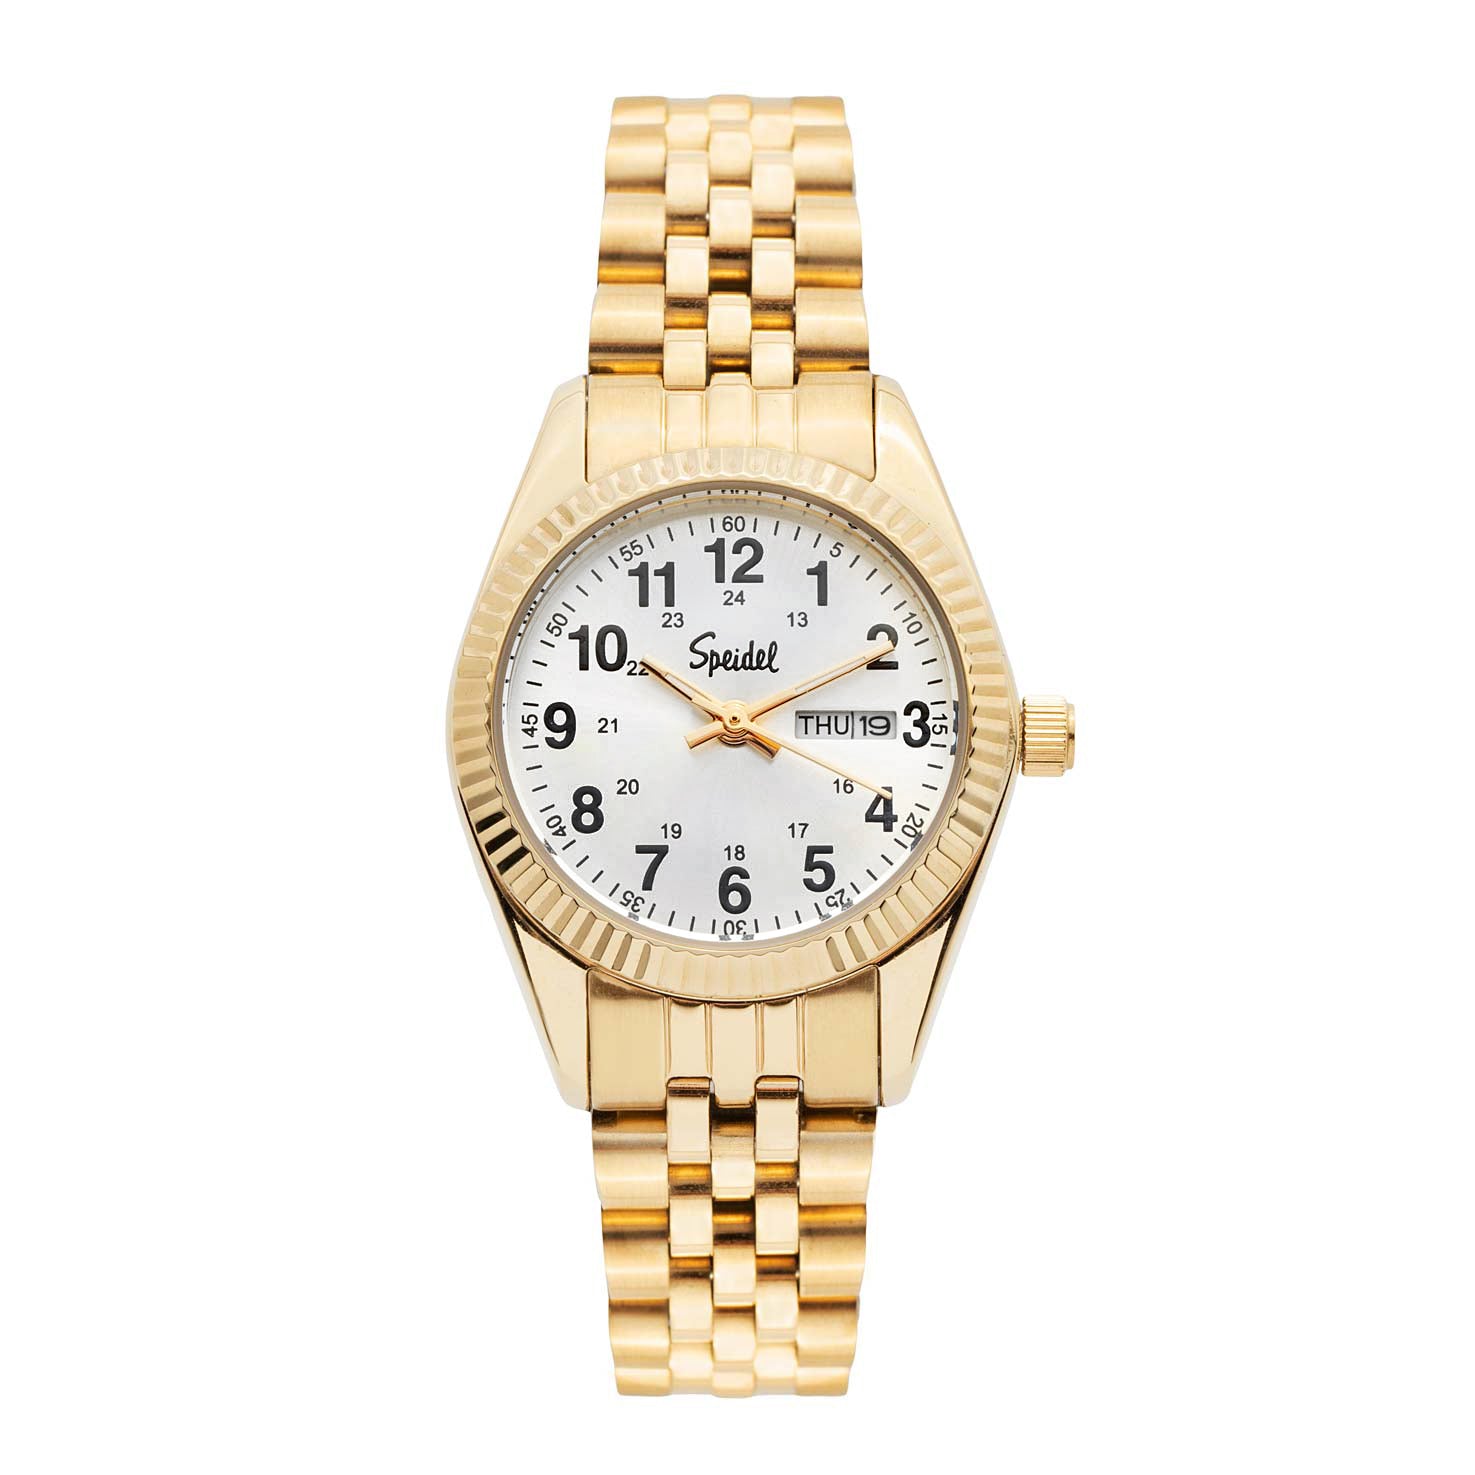 Gold coloured round metal ladies' watch with black face - fancy